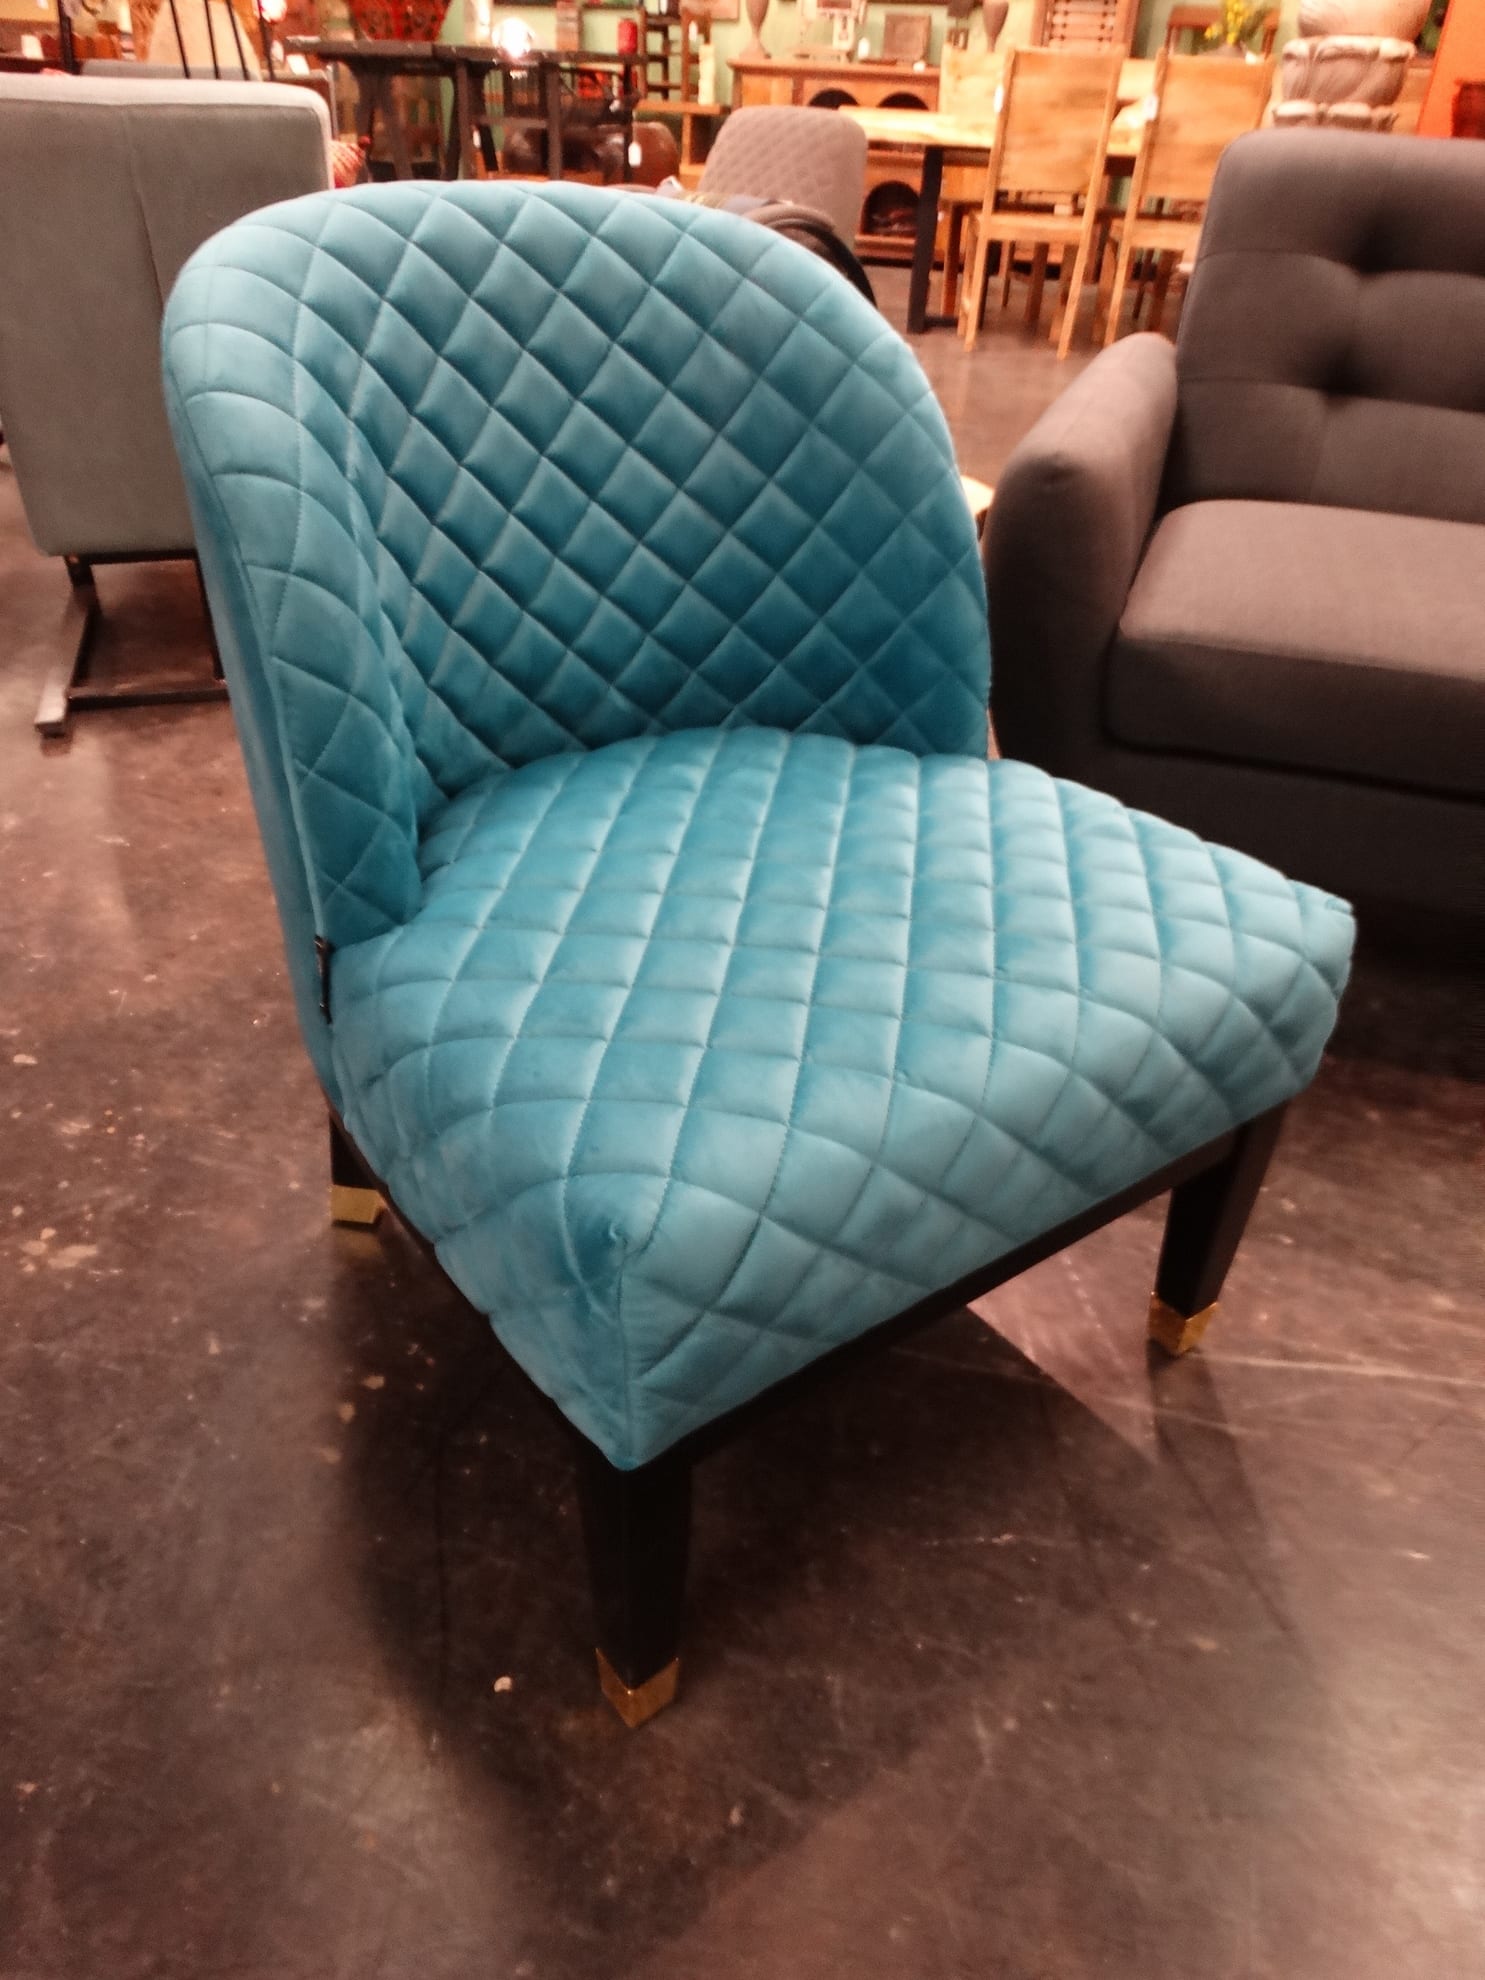 Chair Quilted Soft Light Blue Chair